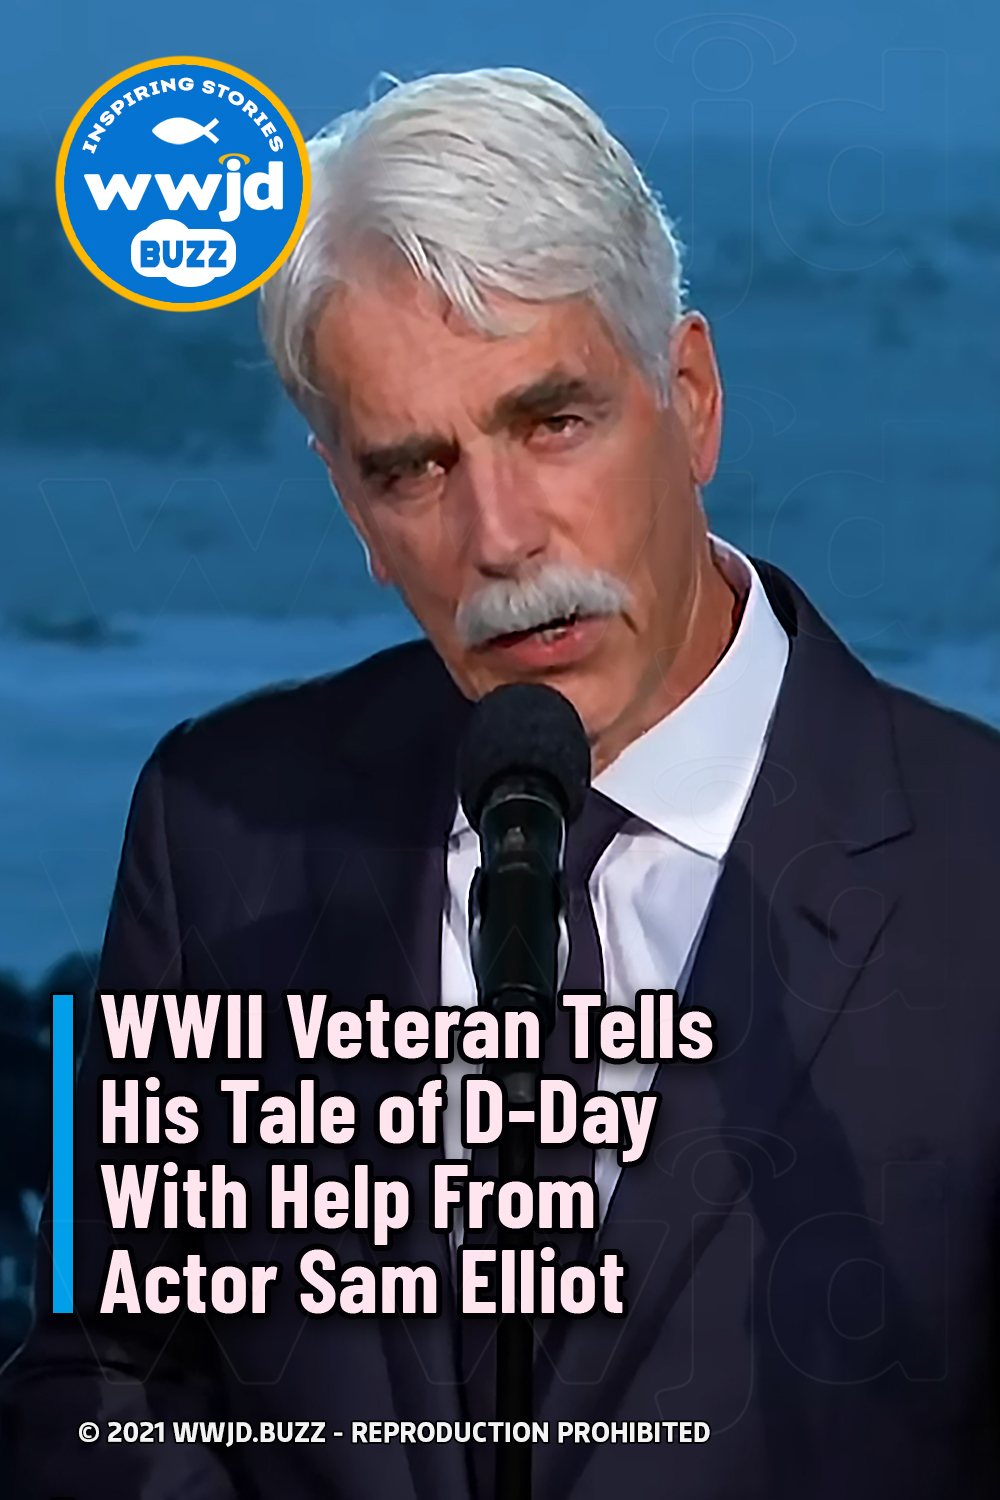 WWII Veteran Tells His Tale of D-Day With Help From Actor Sam Elliot